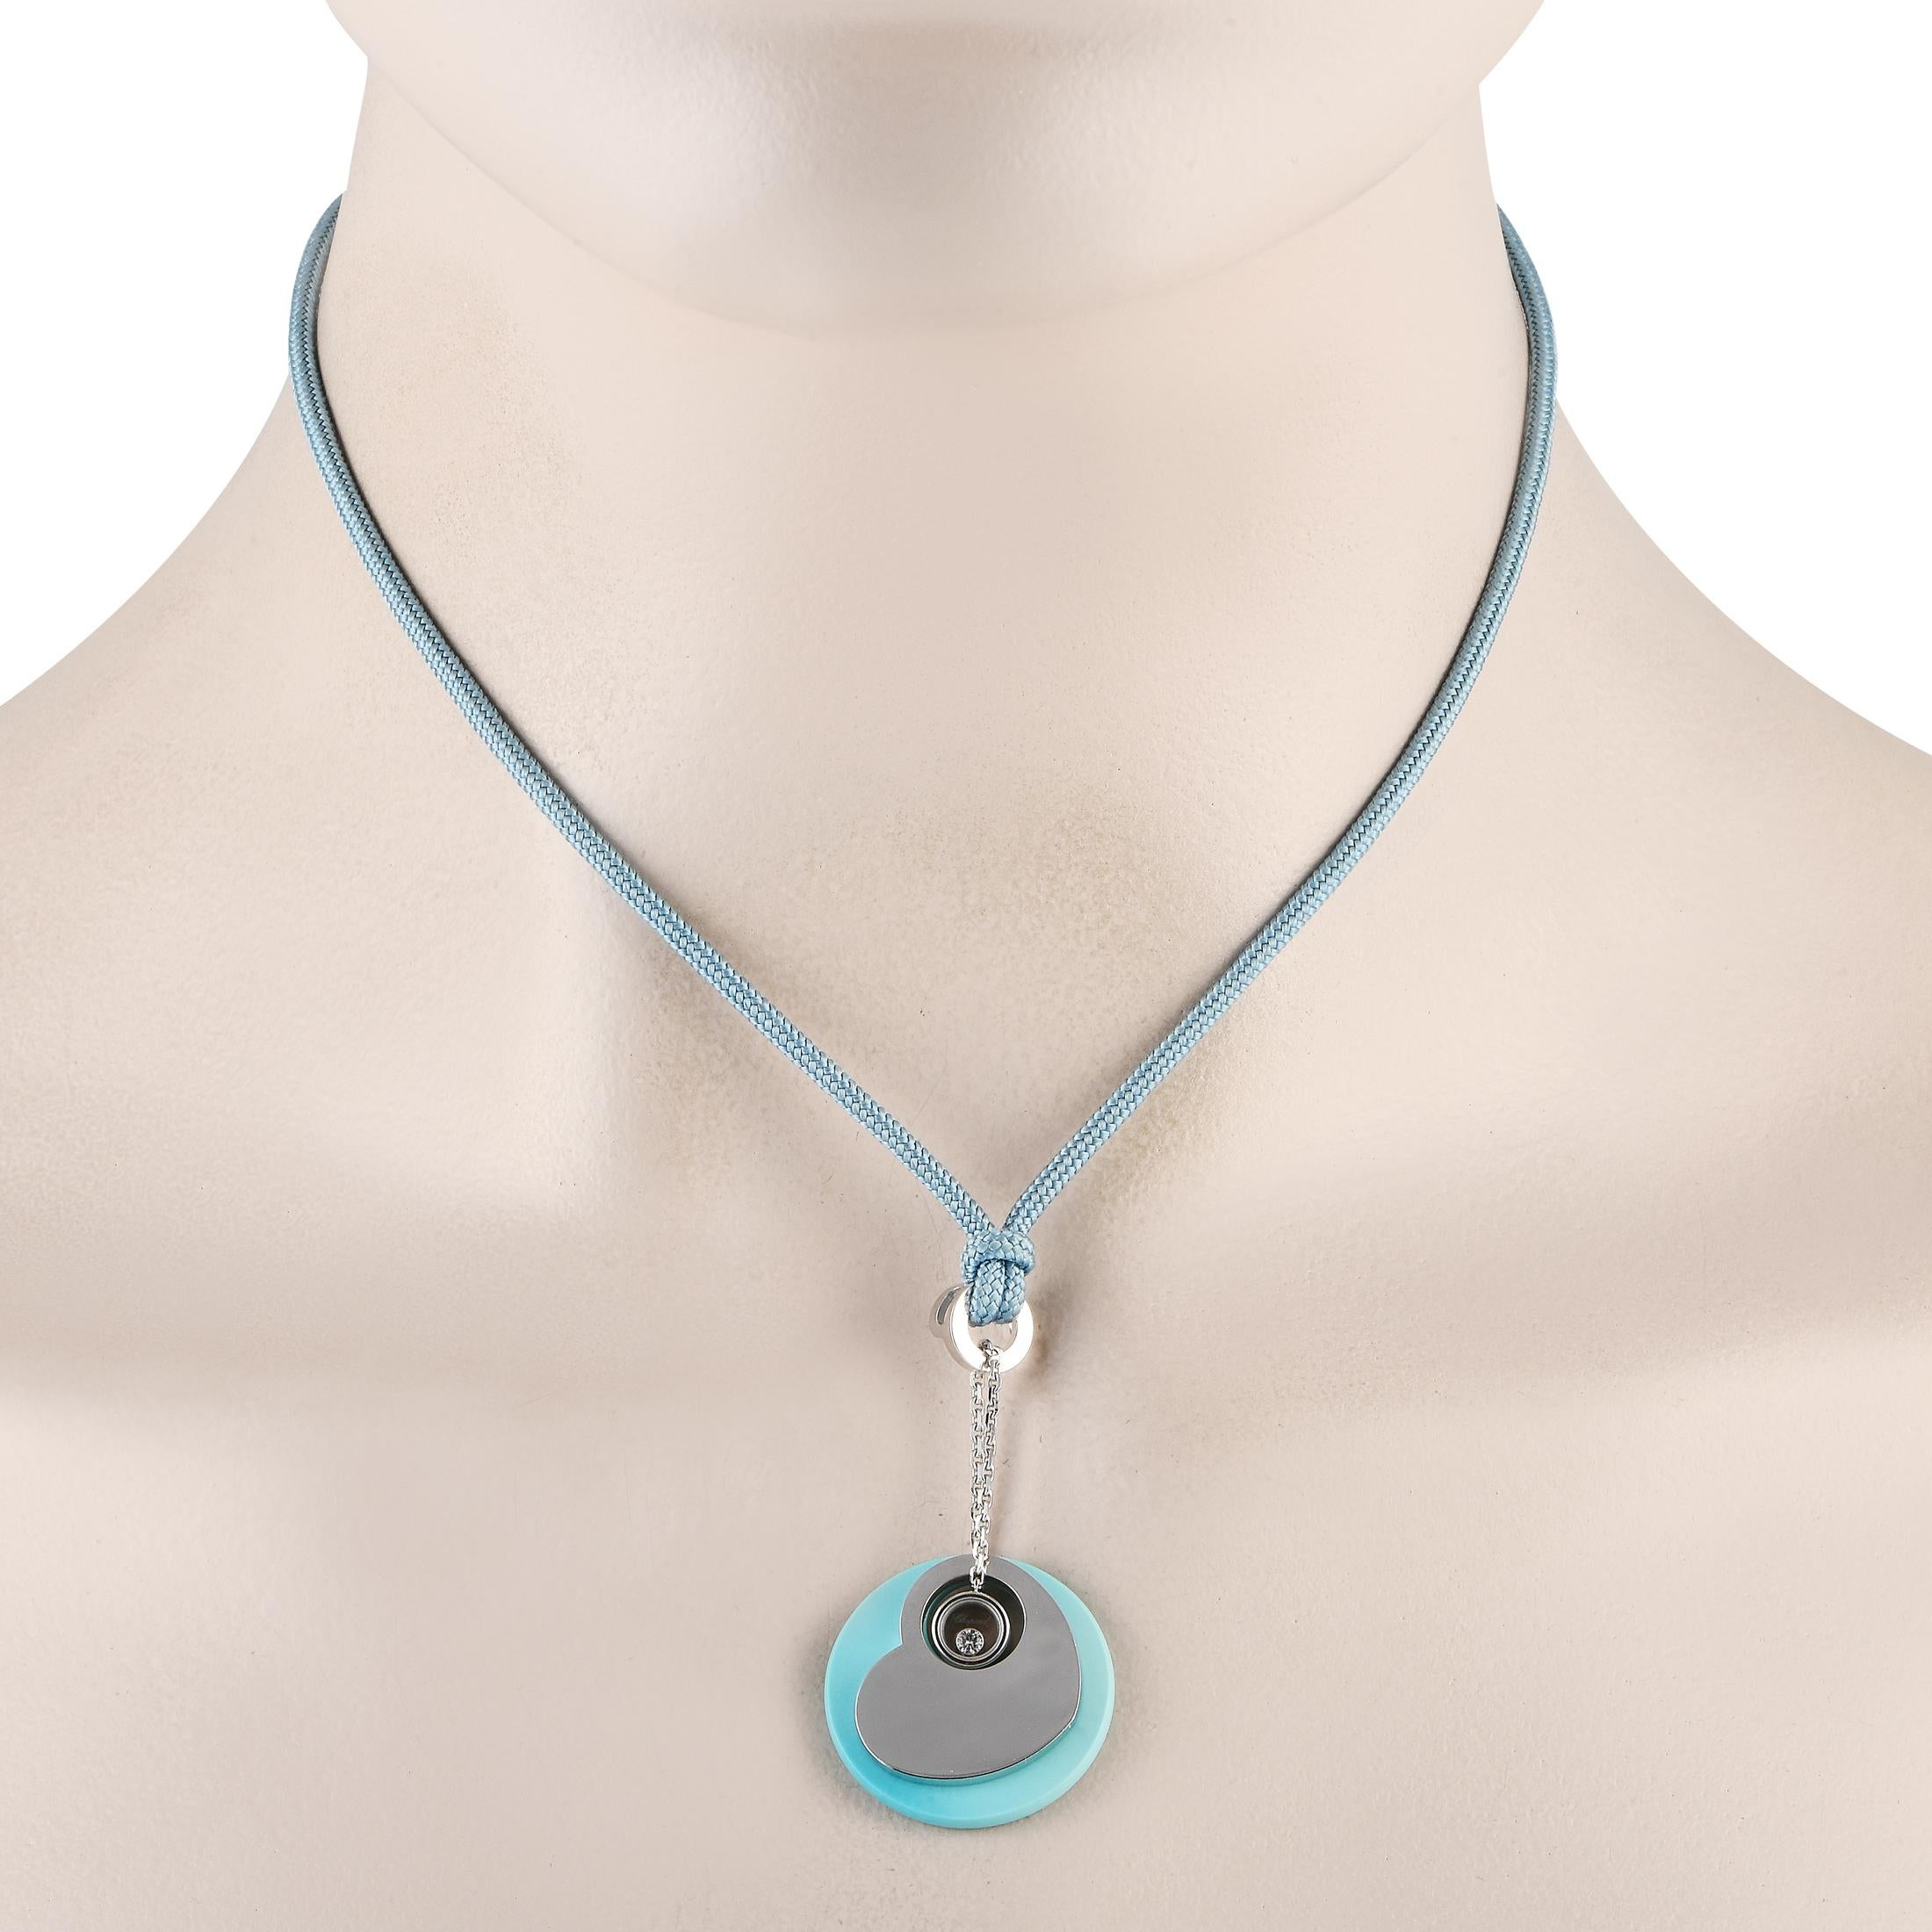 This captivating Chopard Turquoise necklace is a statement-making piece that will continually capture your imagination. Suspended from a 15 blue cord, youll find a bright blue pendant measuring 1 round that is elevated by an 18K White Gold heart